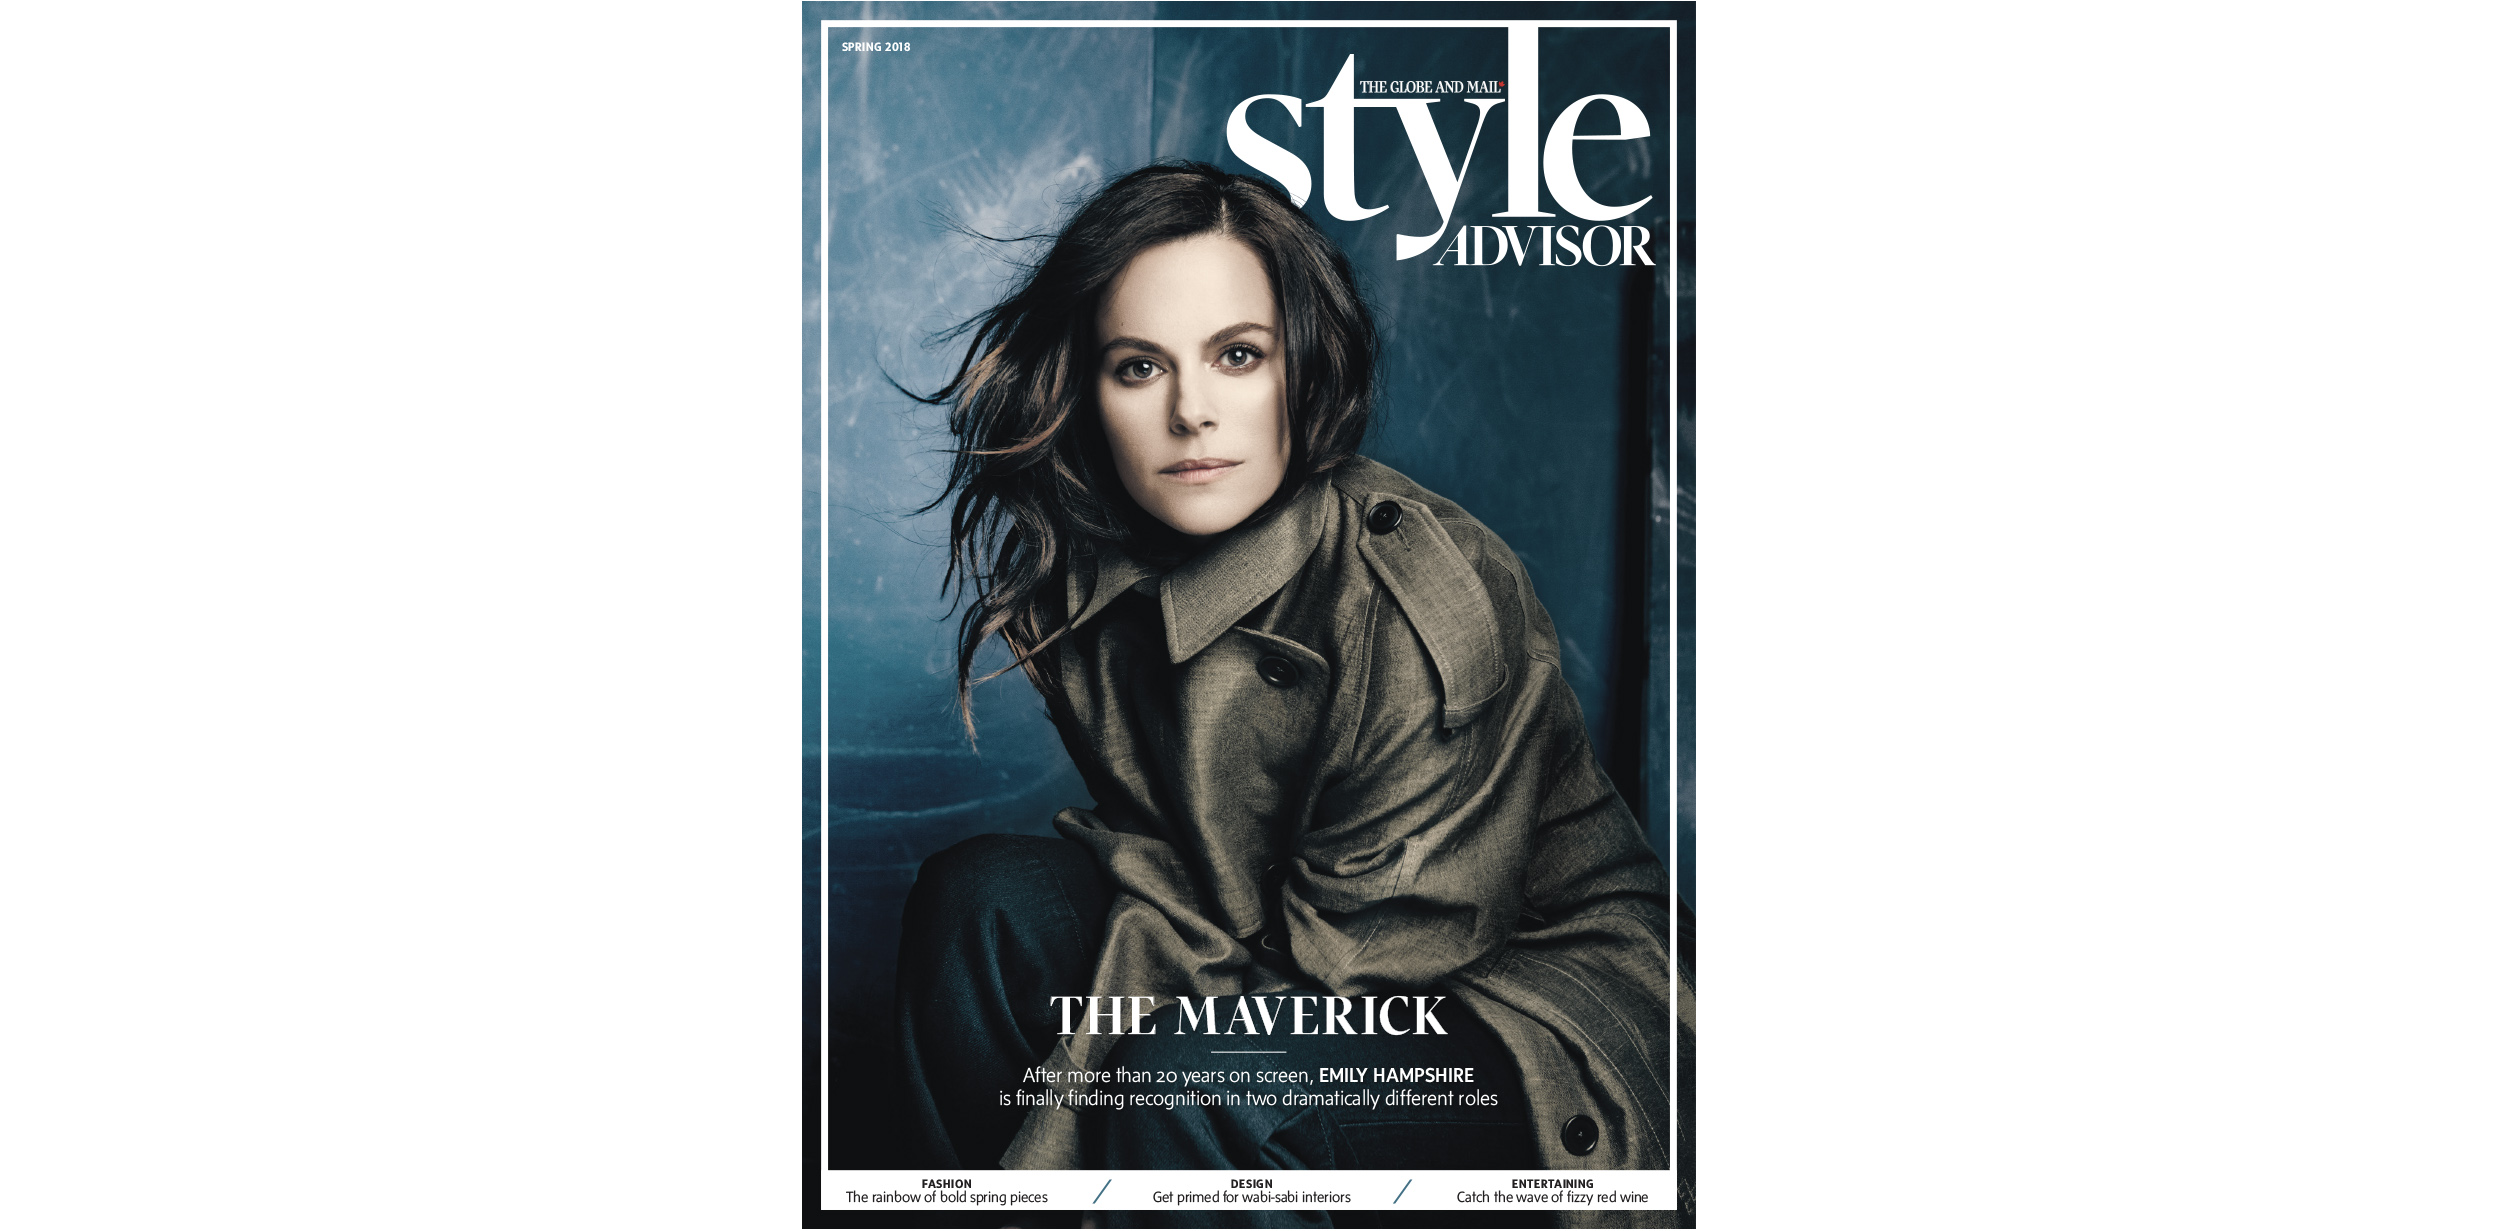 Globe and mail Emily Hampshipre cover.jpg